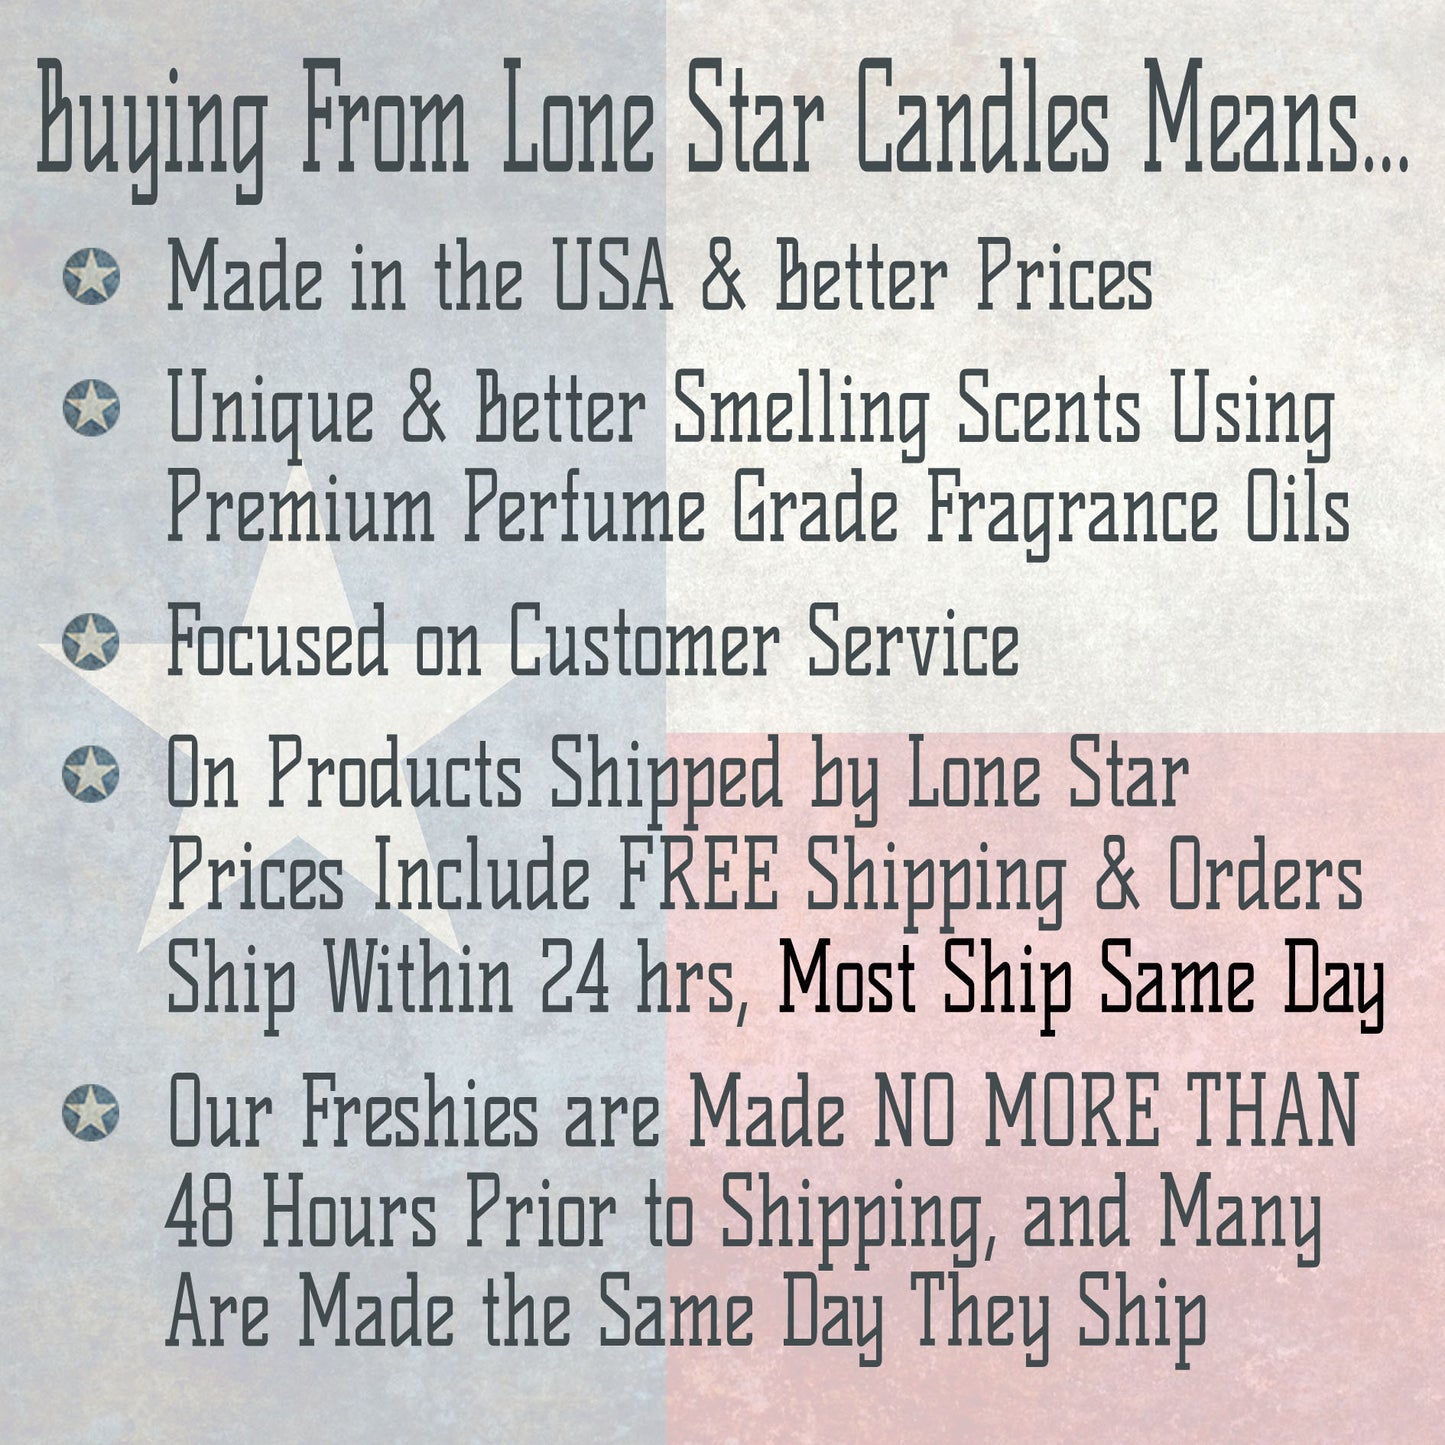 Cranberries & Sandalwood, Lone Star Candles & More's Premium Strongly Scented Freshies, A Delightful Mix of Spiced Cranberry, & Sandalwood, Car & Air Freshener, USA Made in Texas, Chili Pepper 1-Pack